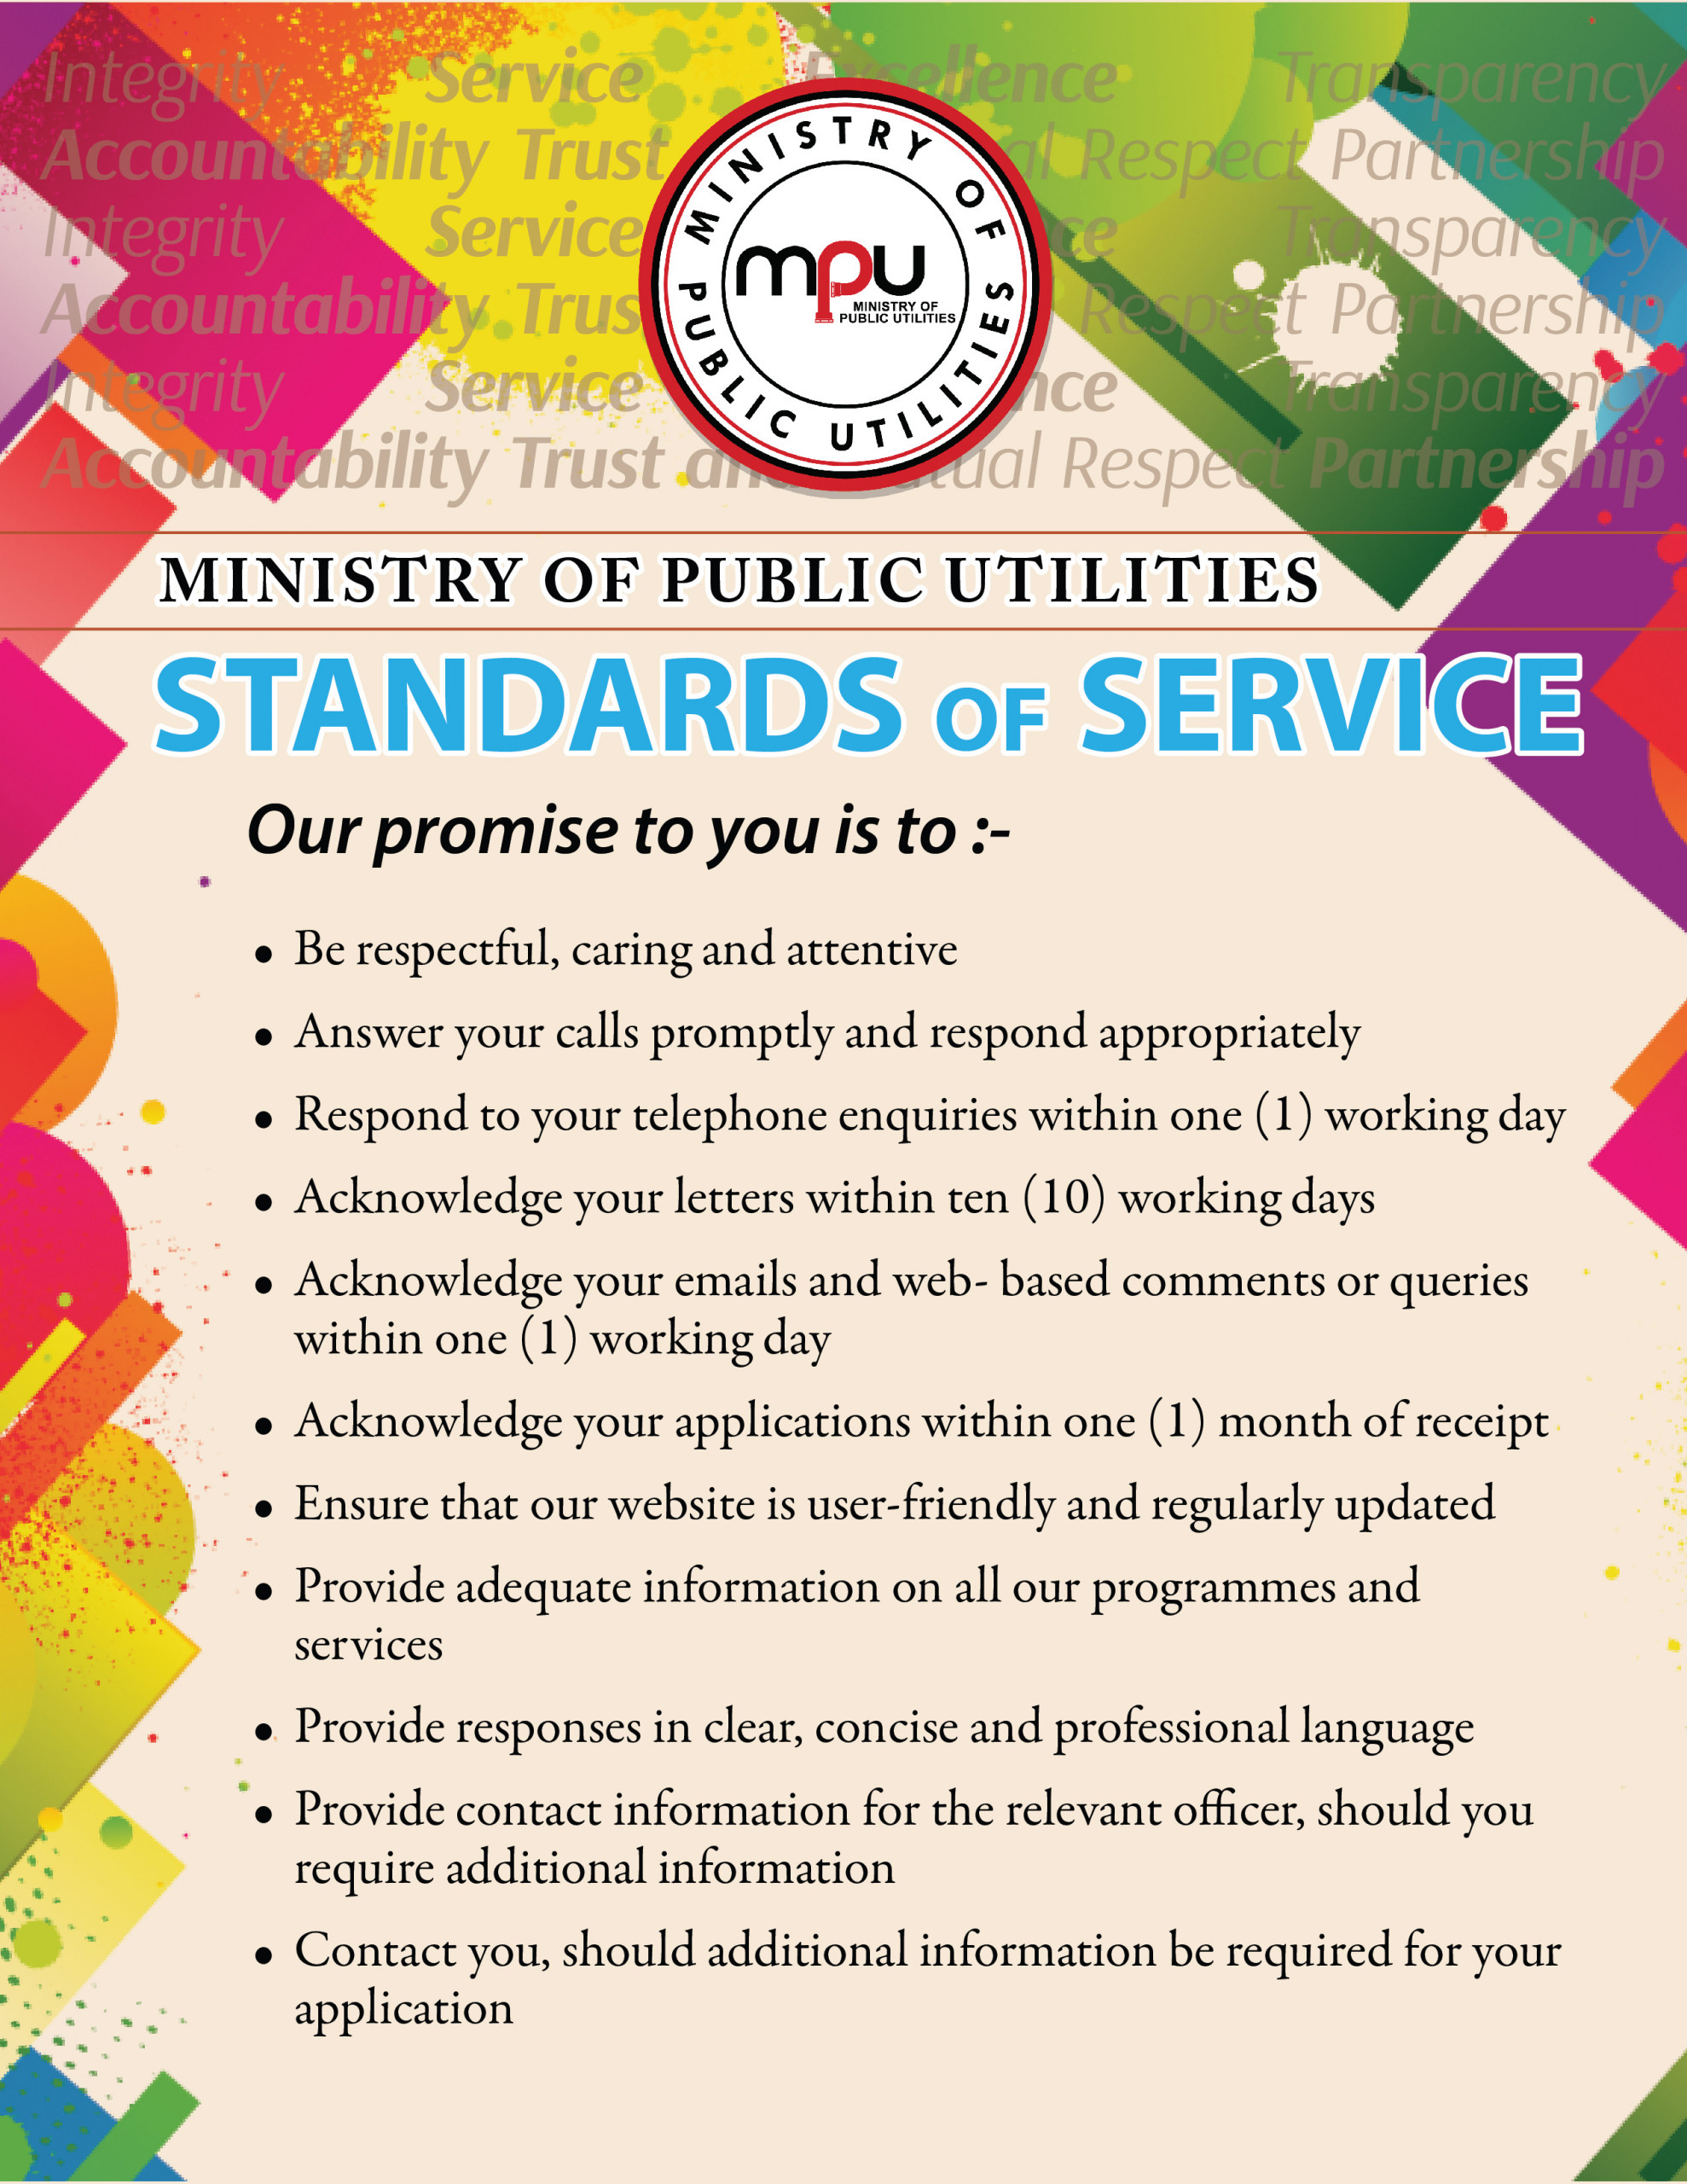 The Ministry of Public Utilities' Standards of Service: to be respectful, caring and attentive; answer calls promptly and respond appropriately, respond to phone calls, emails, web-based comments and queries within one working day and letters within ten working days, acknowledge applications within one month of receipt, ensure that our website is user friendly and regularly updated, provide adequate information on all our programmes and services, provide responses in a clear, concise and professional language, provide contact information for the relevant officer, should you require further information; contact you should additional information be required.